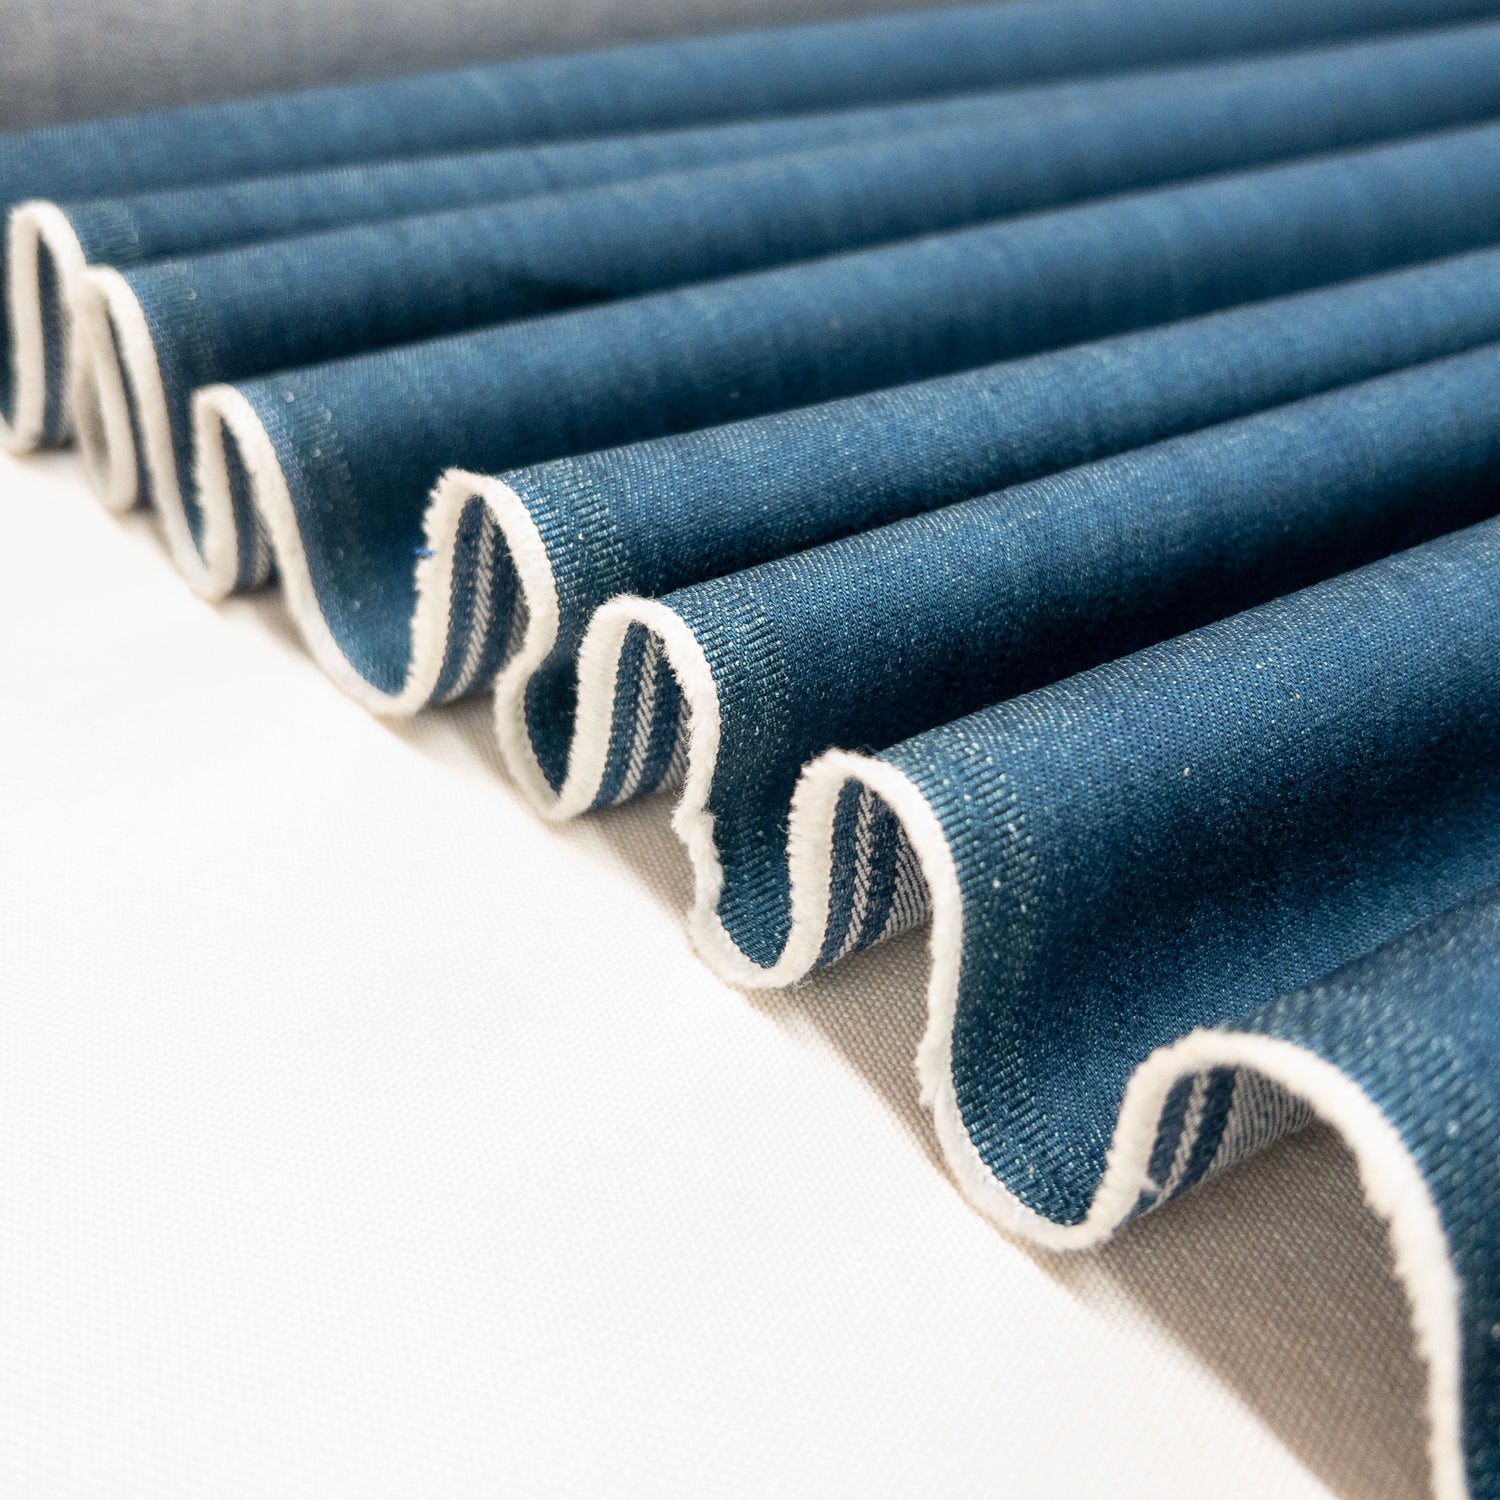 Denim Fabric - Everything You Need To Know - Bryden Apparel